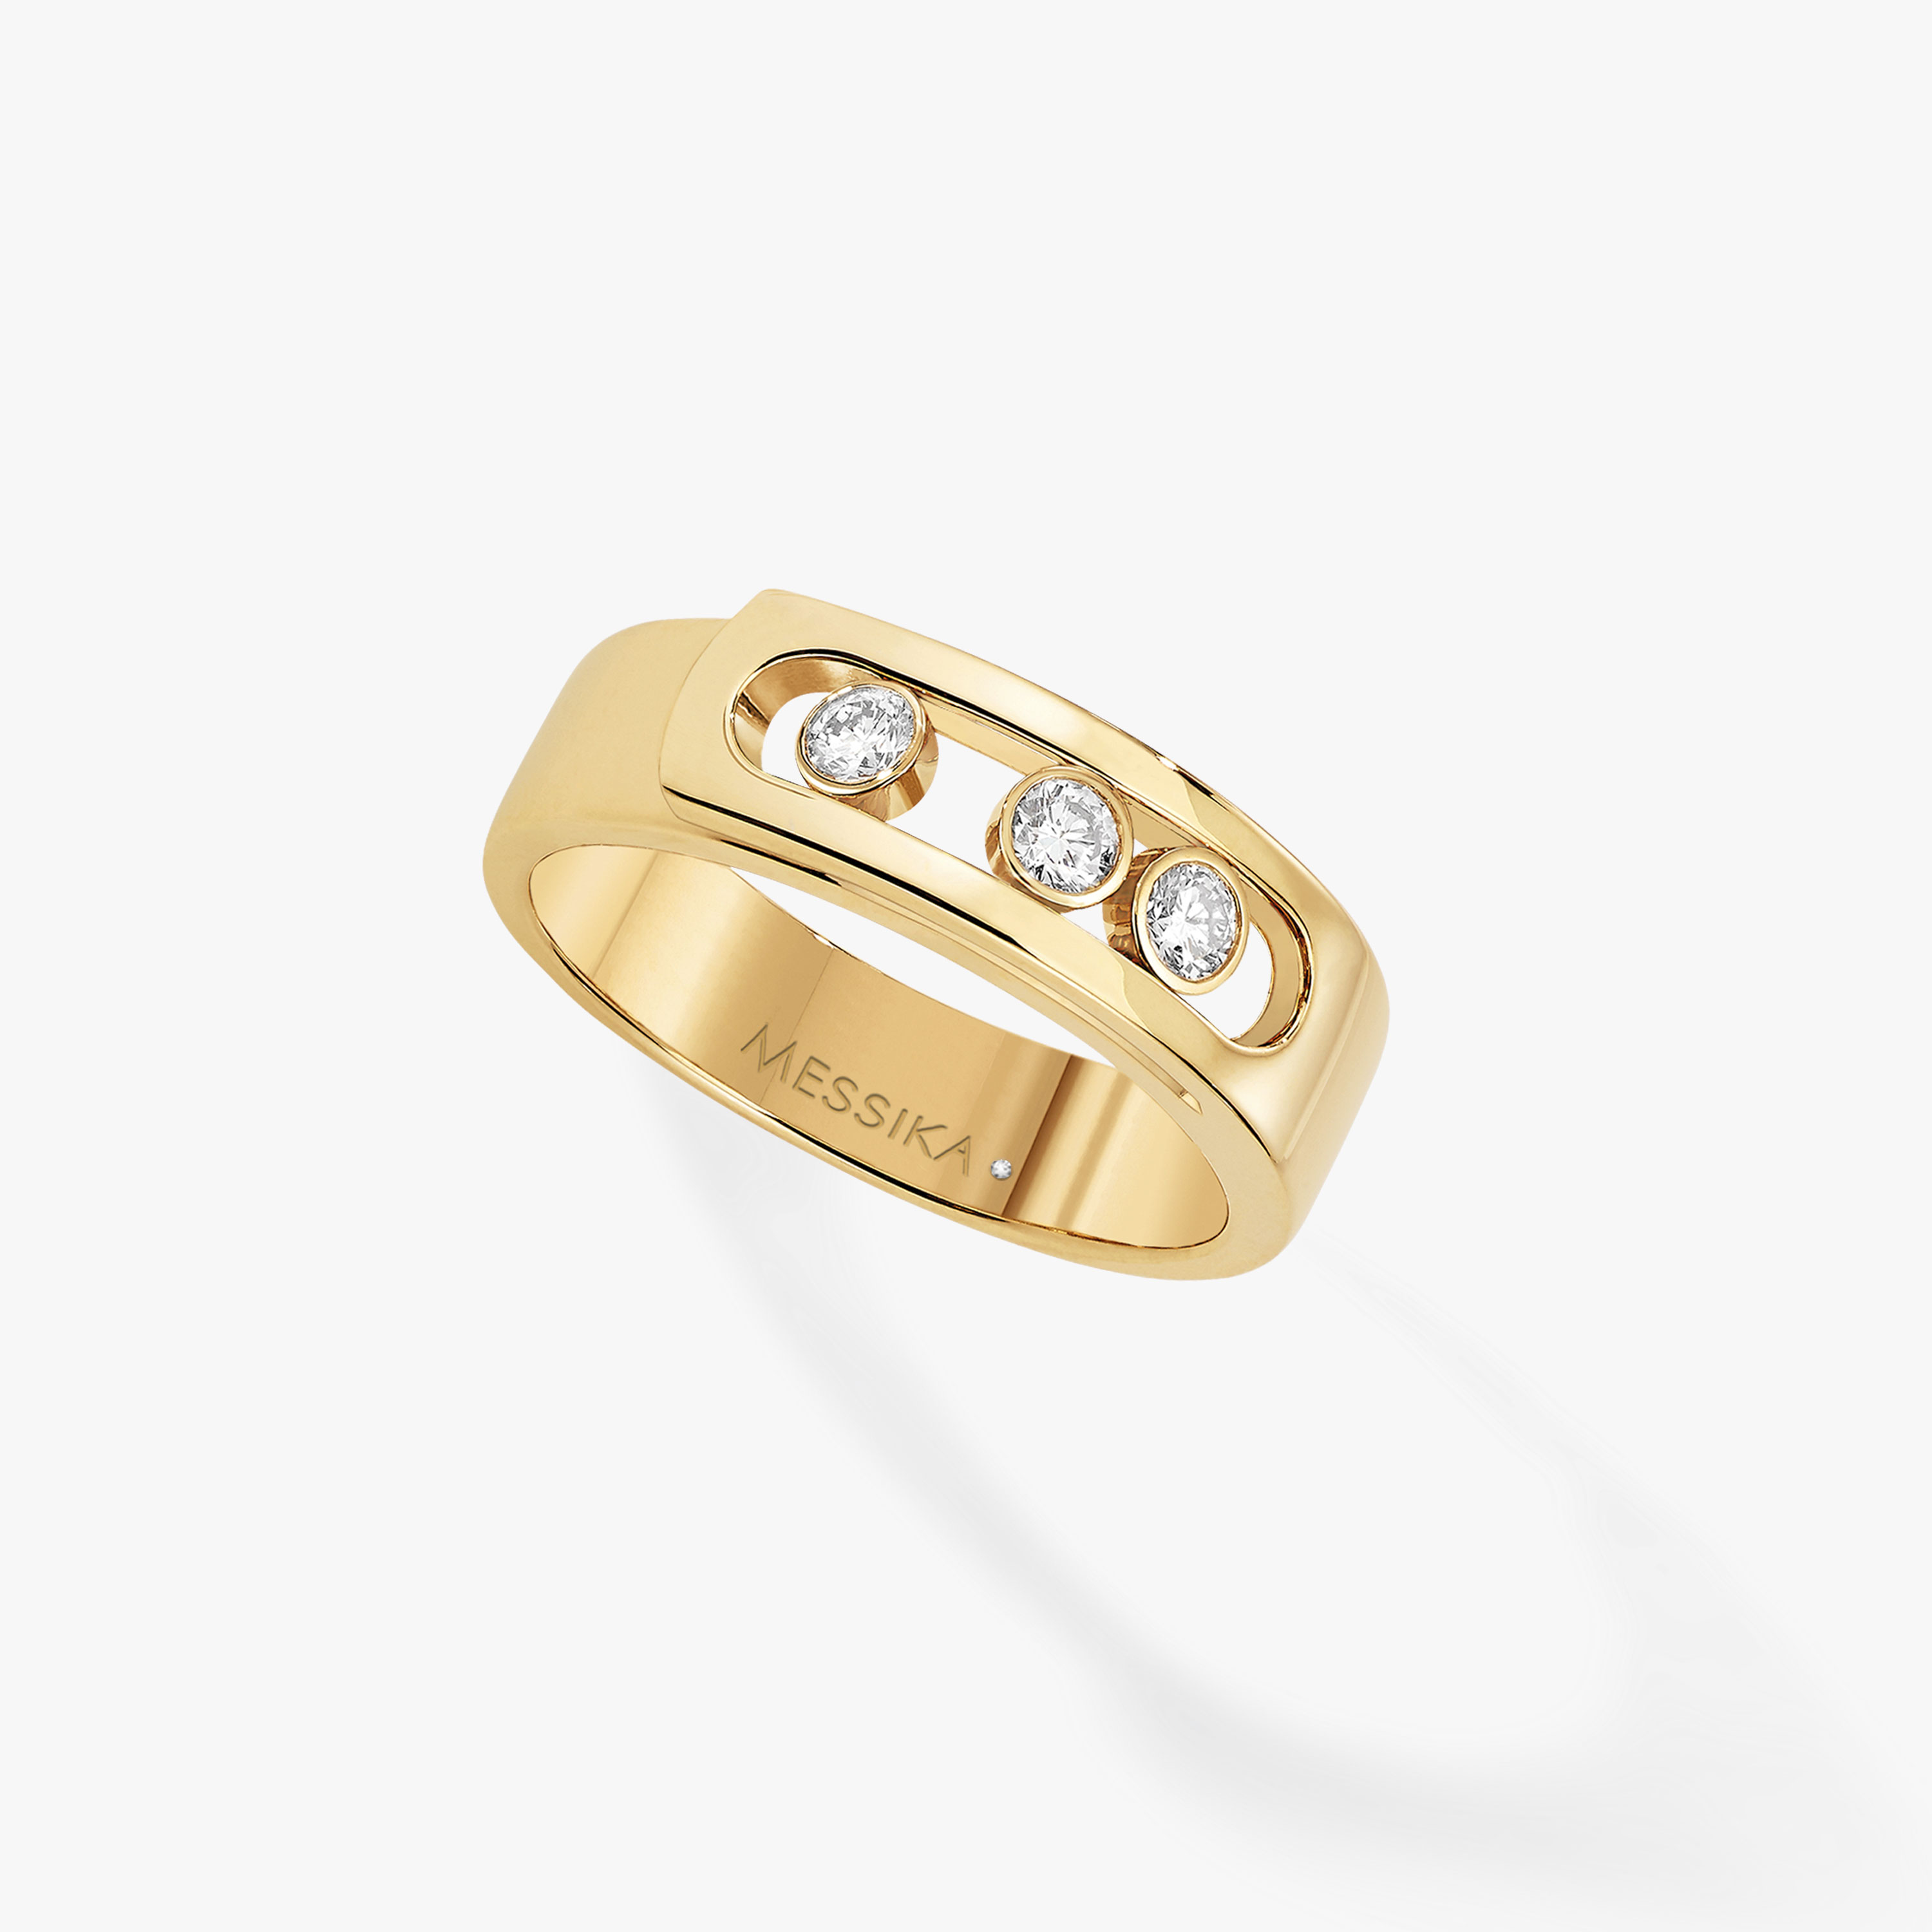 Move Noa Yellow Gold For Her Diamond Ring 06262-YG